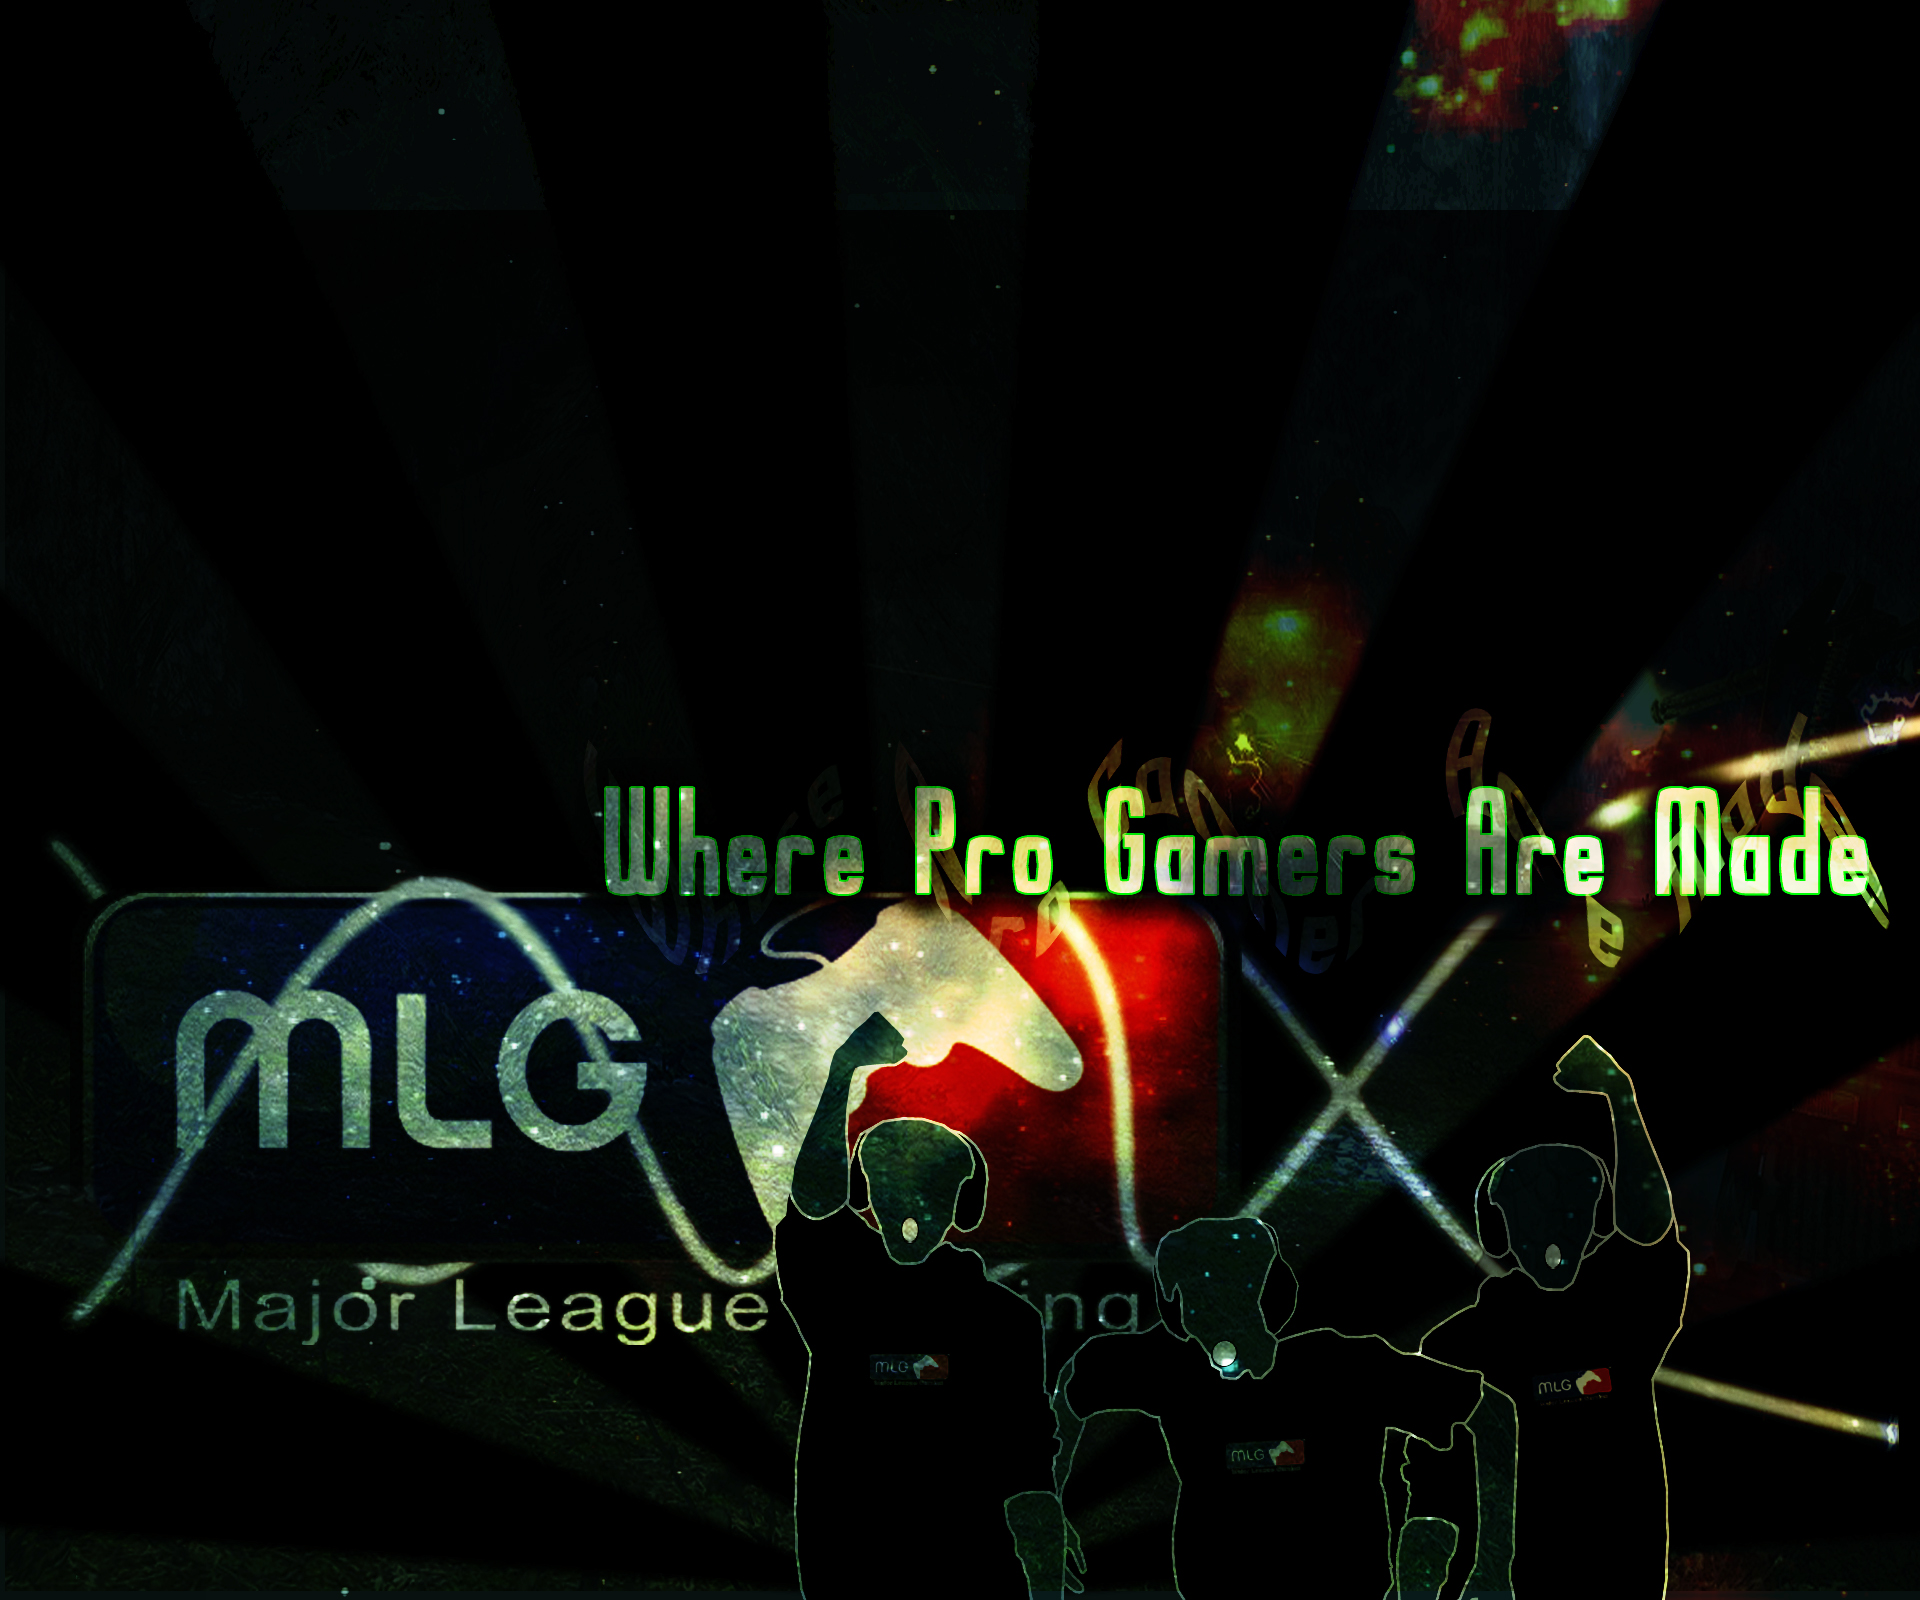 Art From Over Million Pieces Full HD Mlg Background Properly